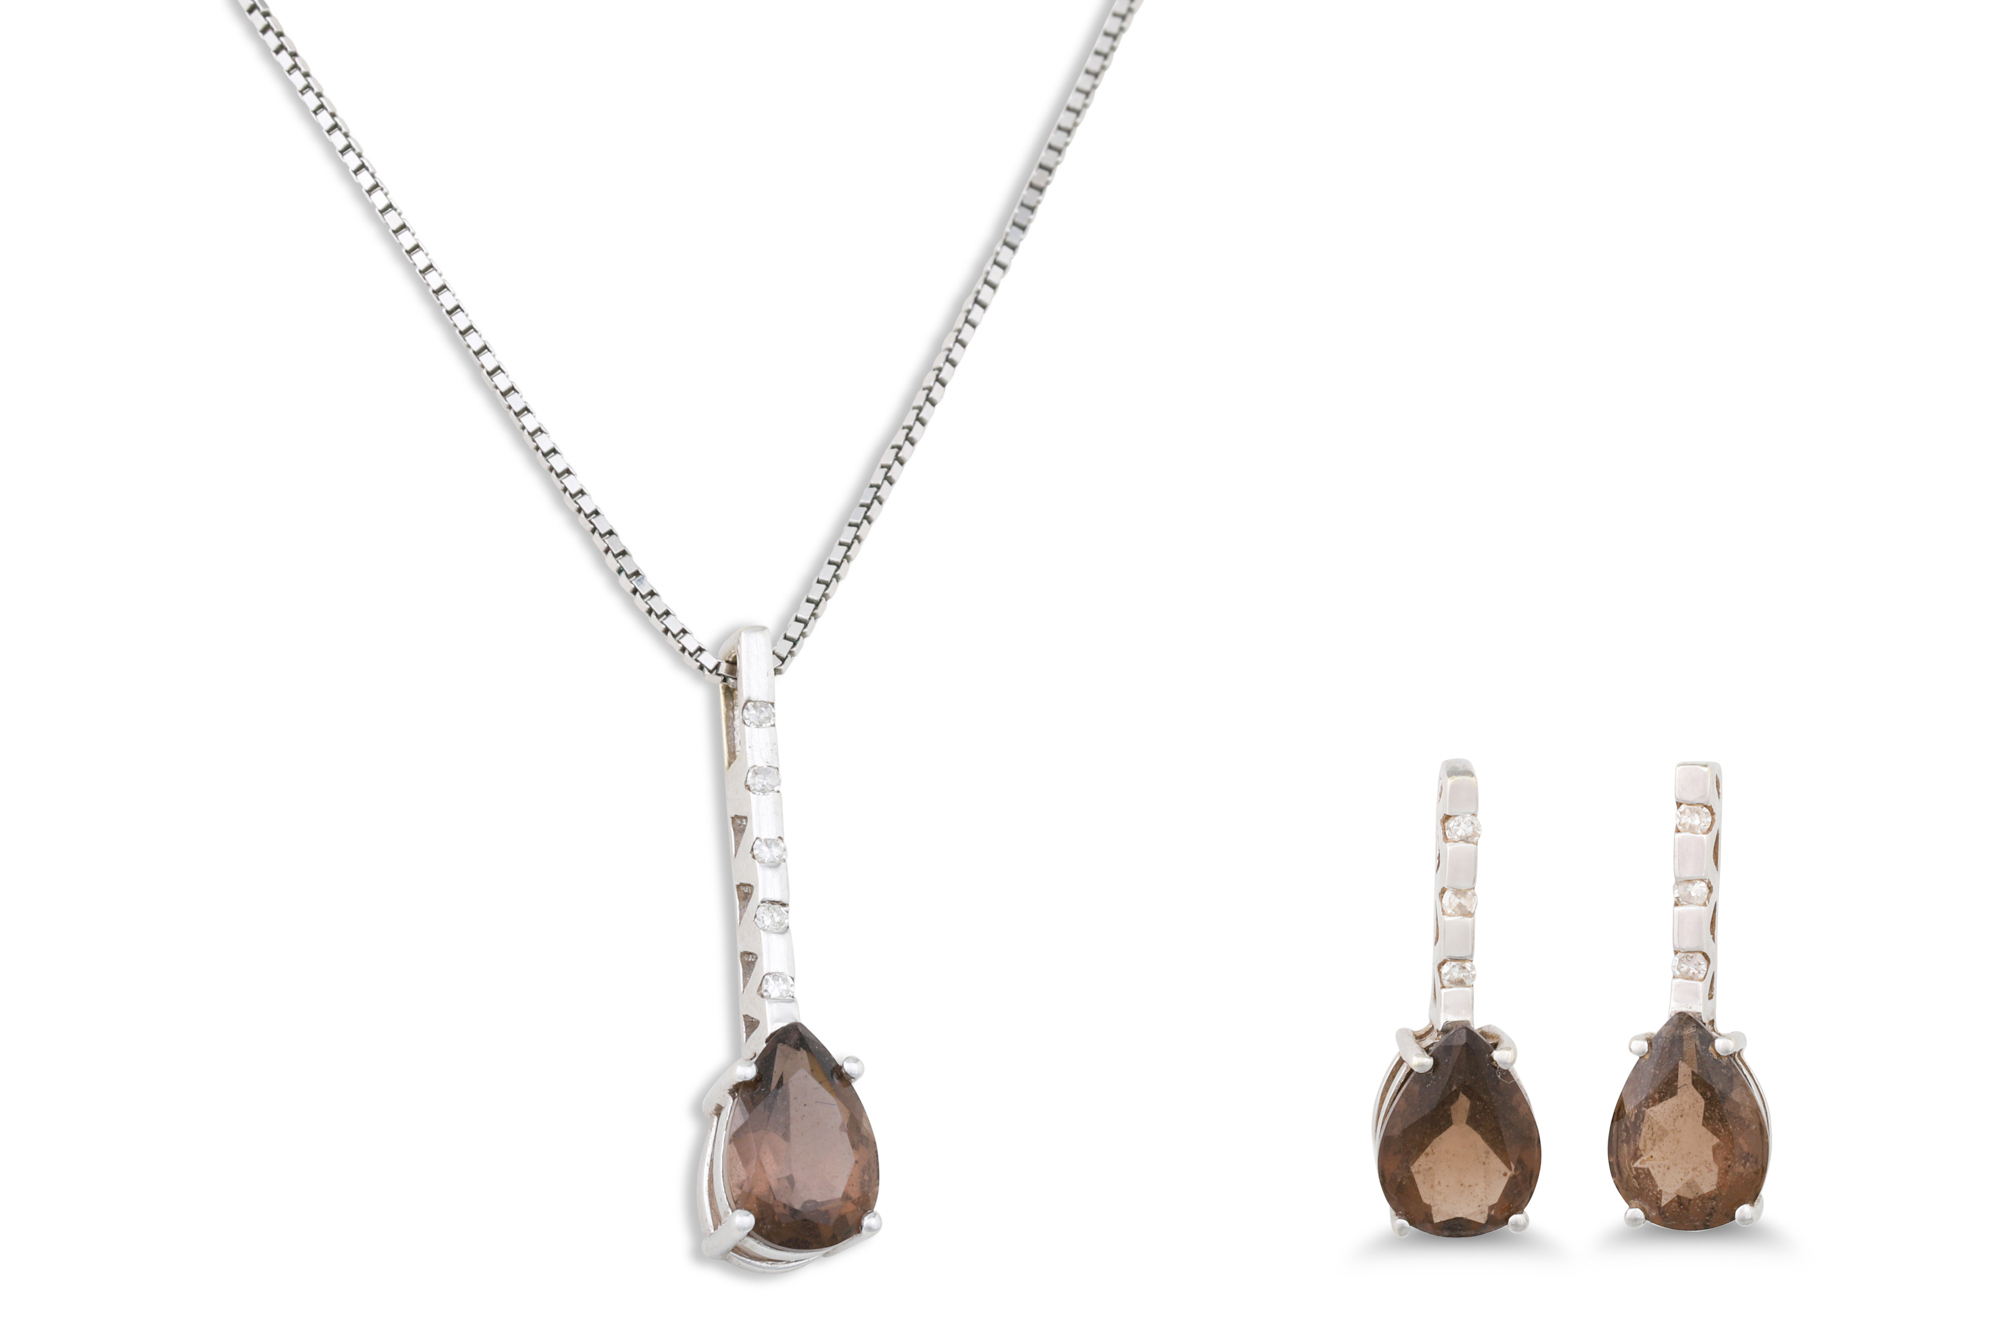 A DIAMOND AND SMOKY QUARTZ PENDANT, mounted in white gold, together with matching earrings